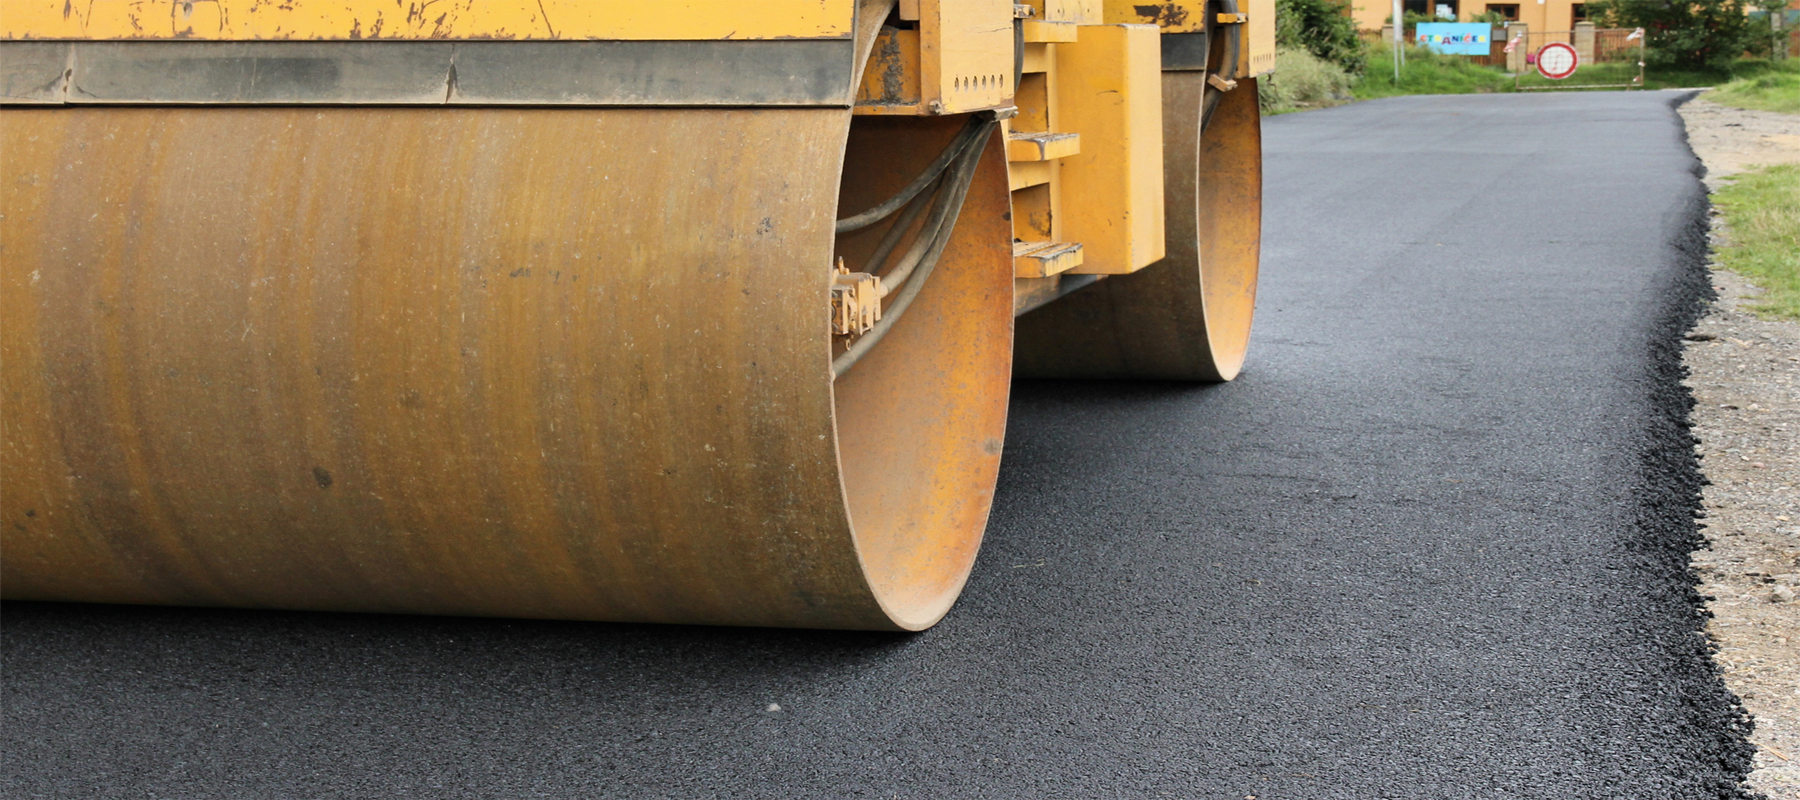 Large Paver Equipment Paving Residential Driveway